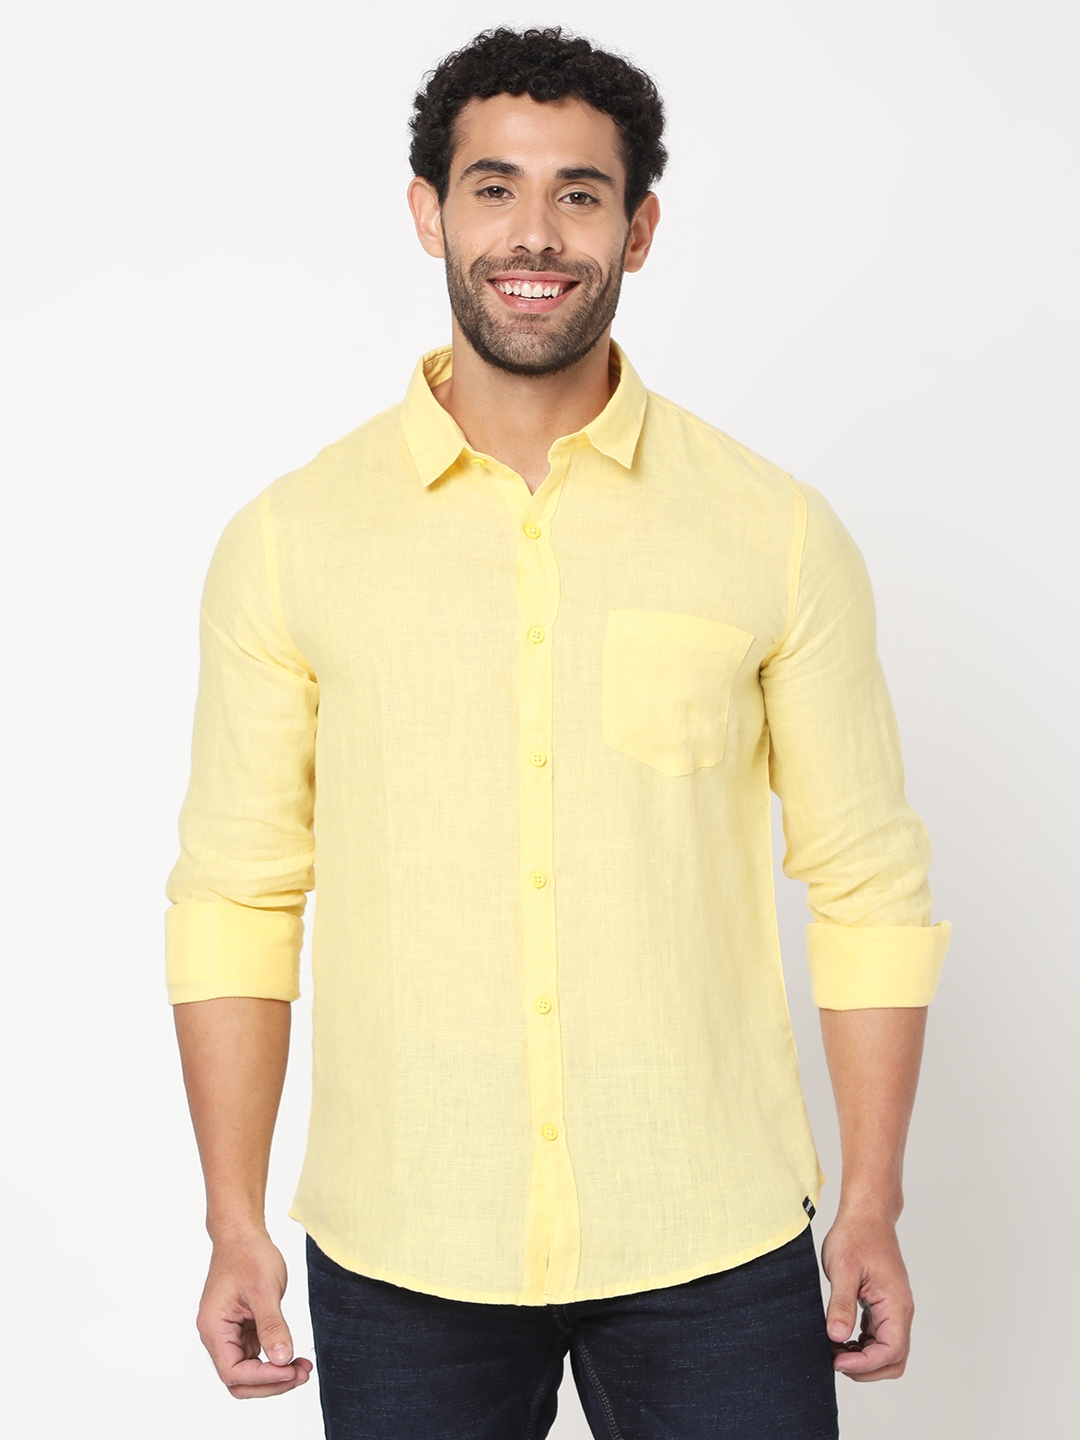 Men's Yellow Cotton Blend Solid Casual Shirts